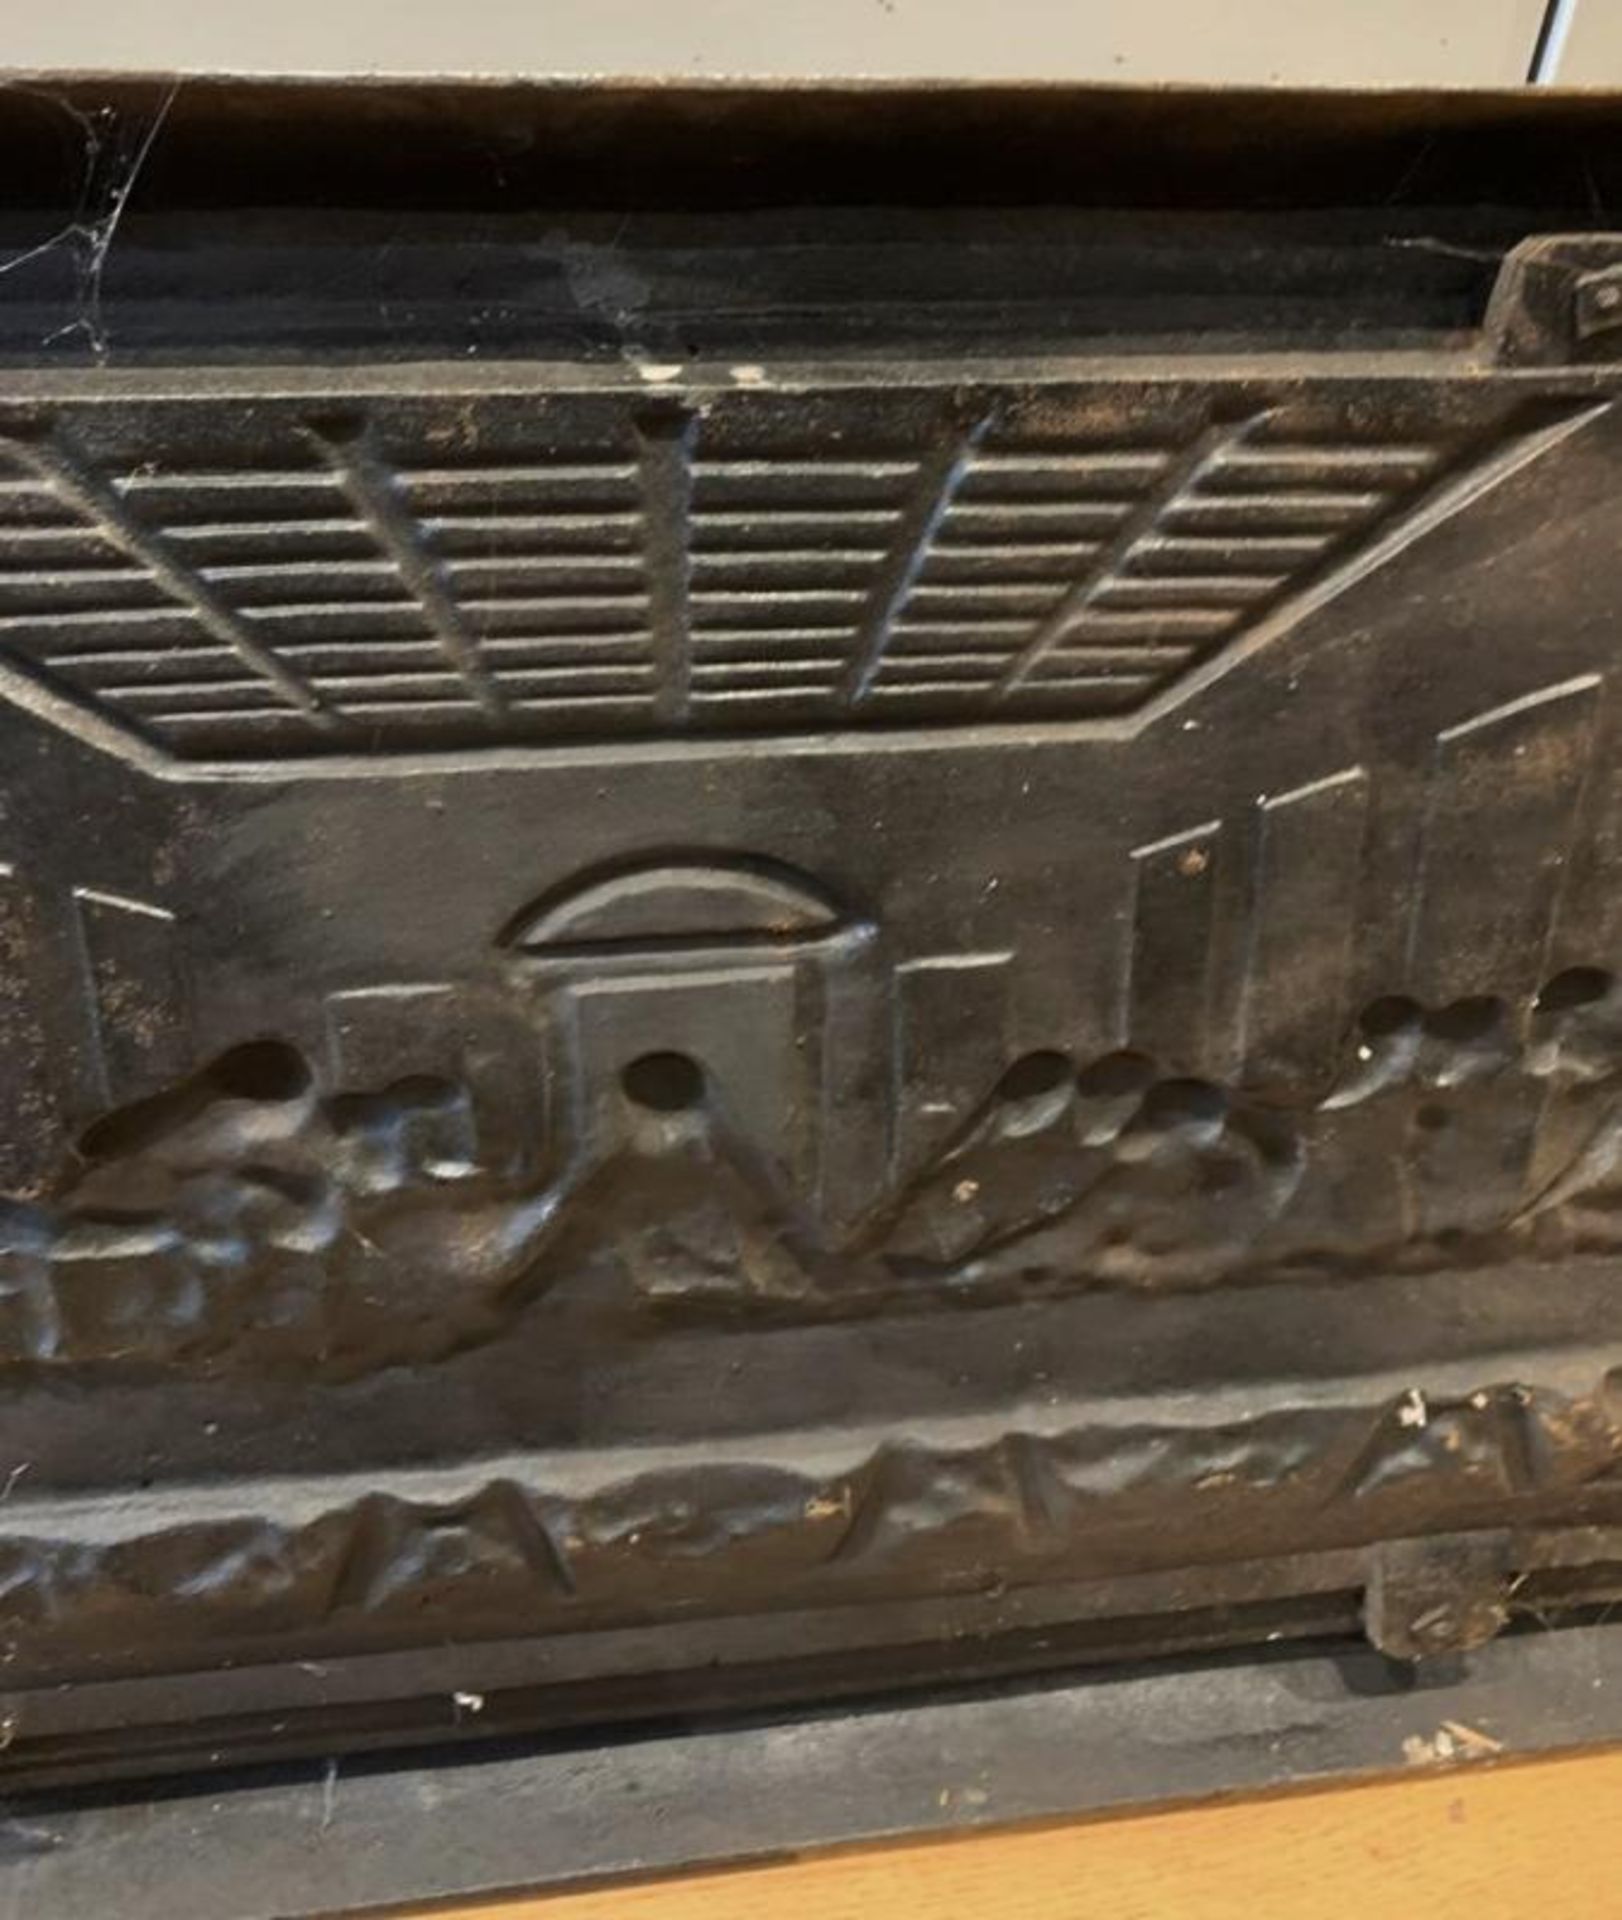 1 x Heavy Solid Cast Iron Rectangular Sculpture Featuring The Famous 'Last Supper' Scene - - Image 10 of 14